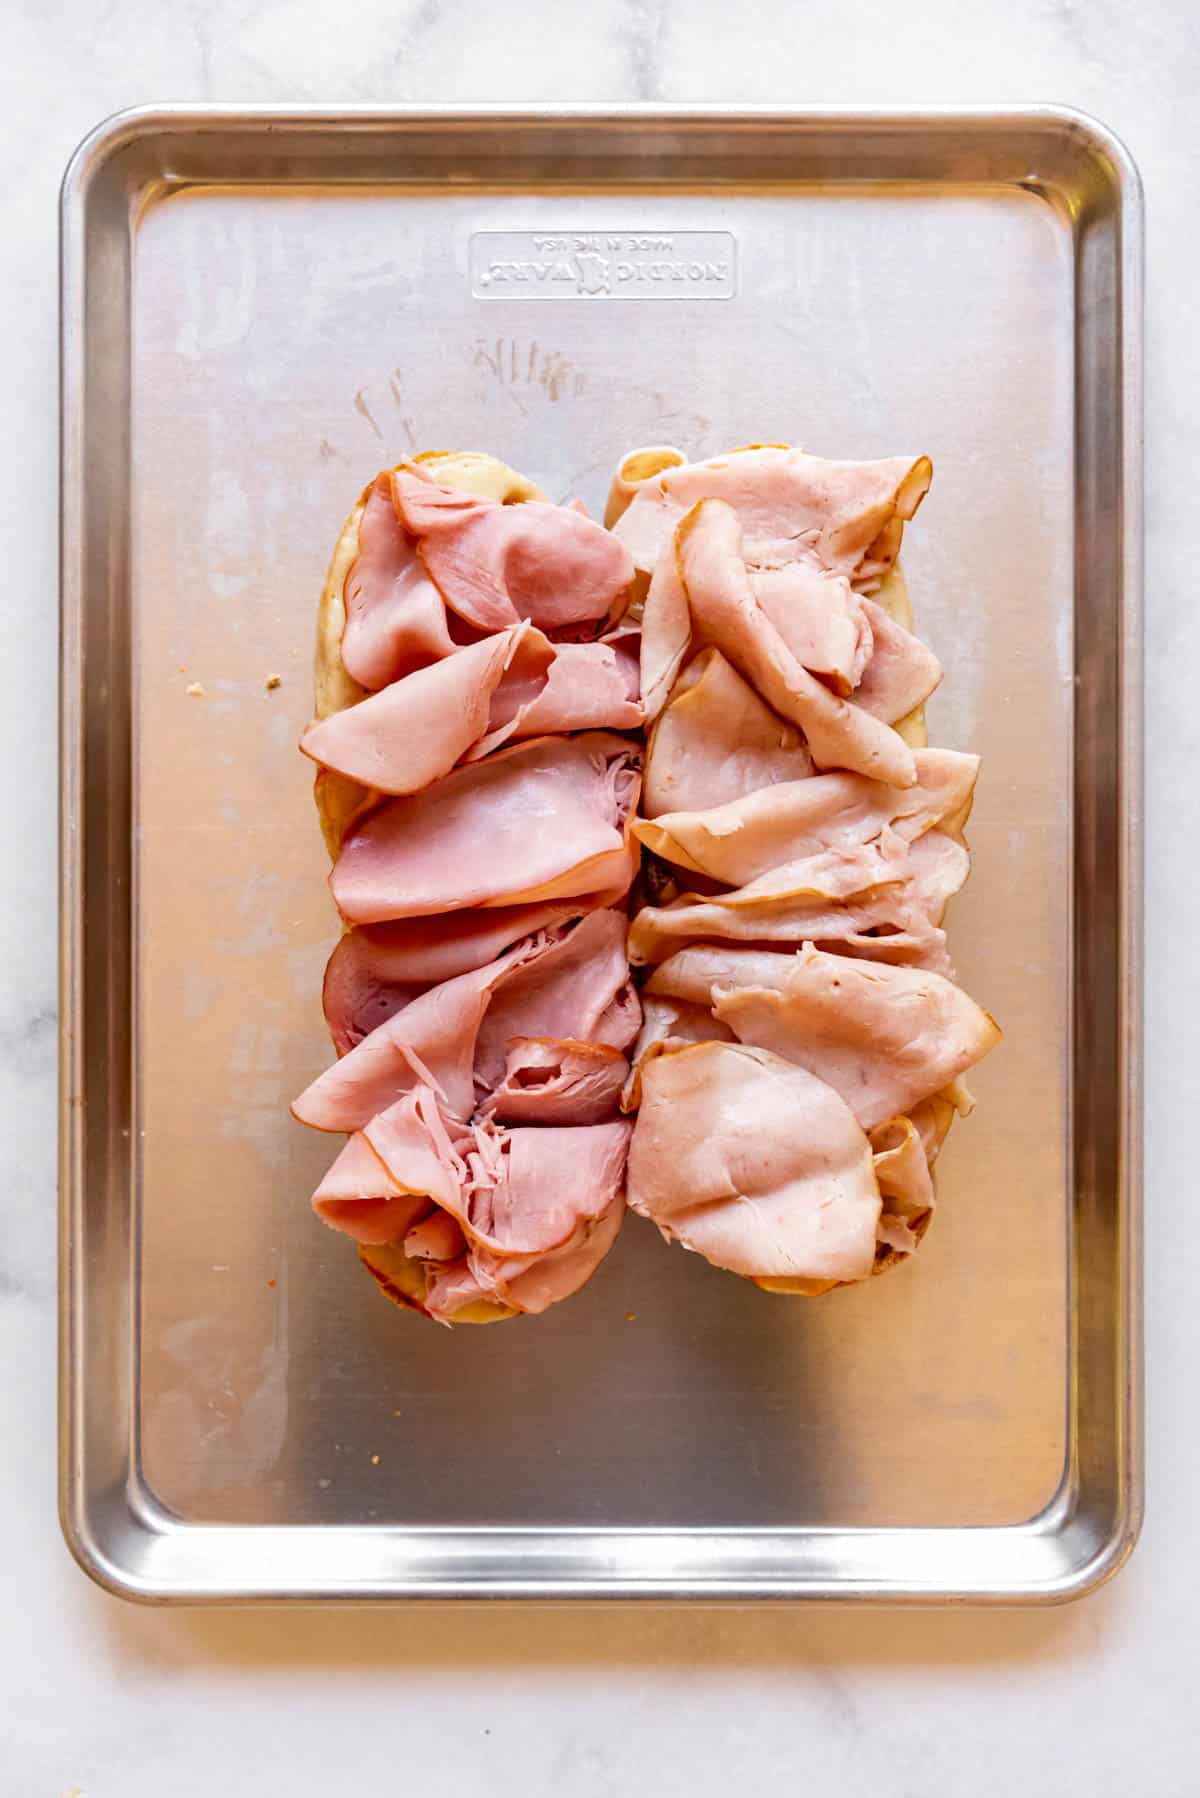 Layered thinly sliced turkey and ham on a grinder roll.